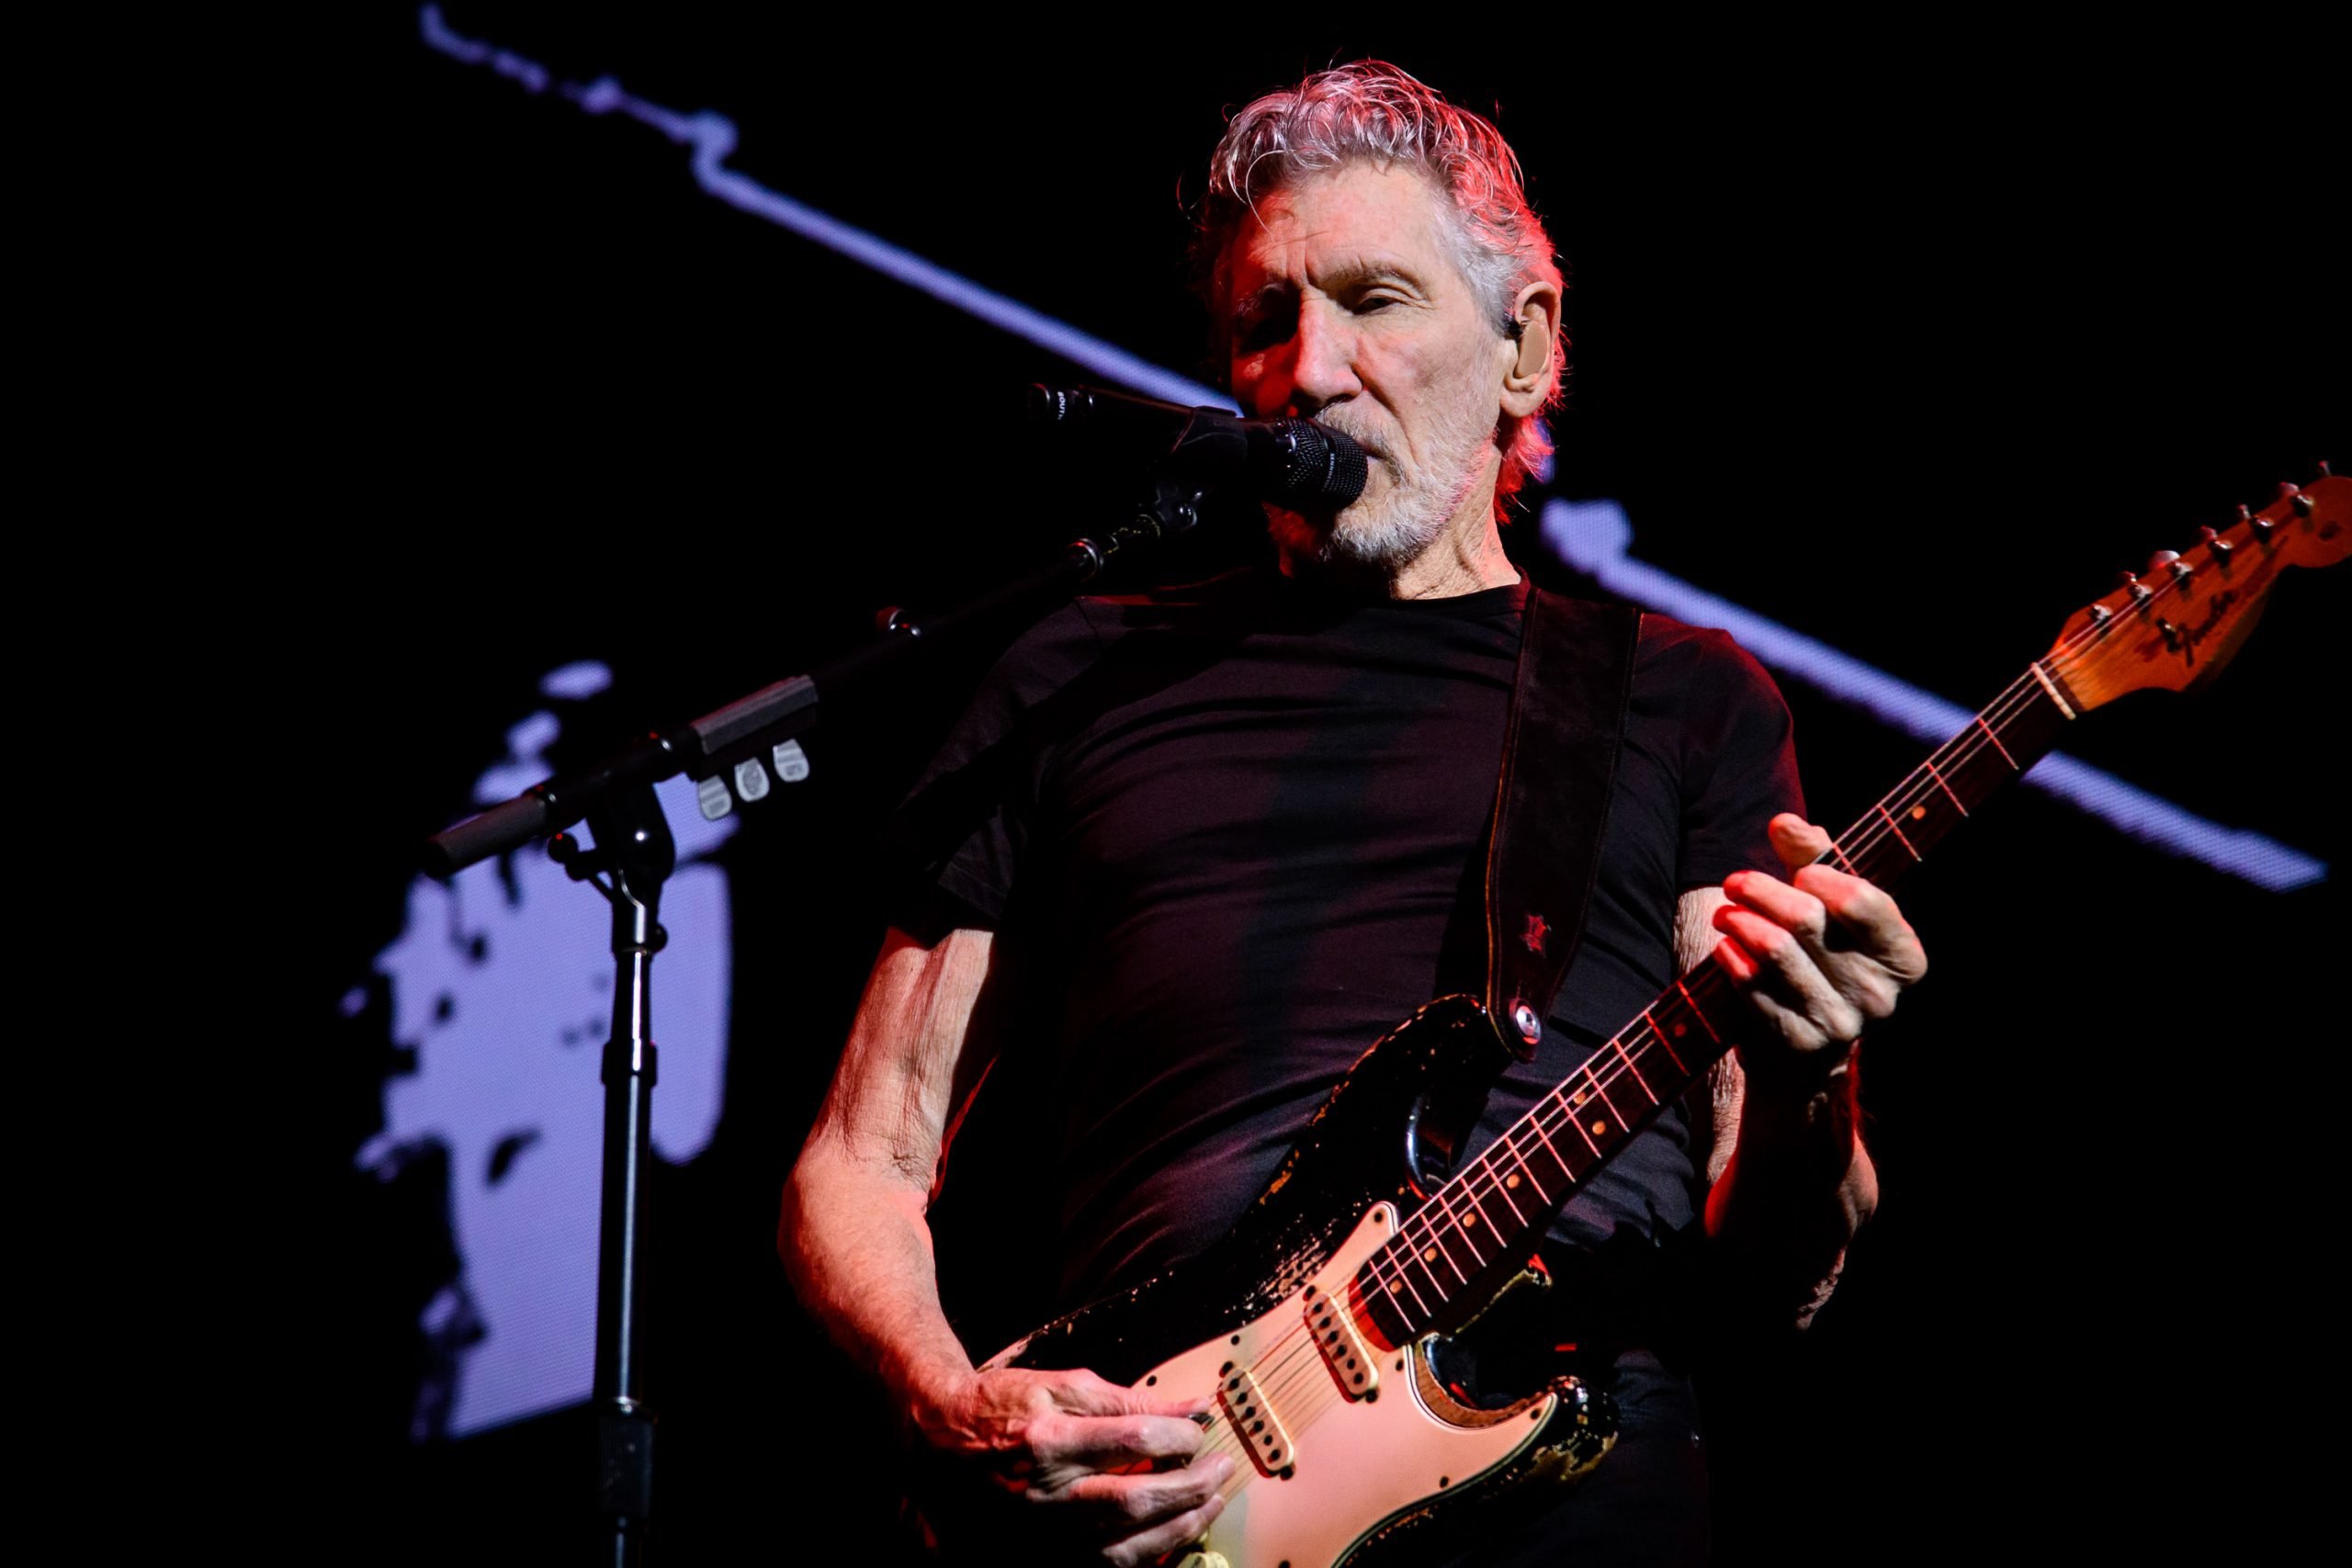 Musician, singer-songwriter, composer, and co-founder of the progressive rock band Pink Floyd, Roger Waters, performs at a sold out show